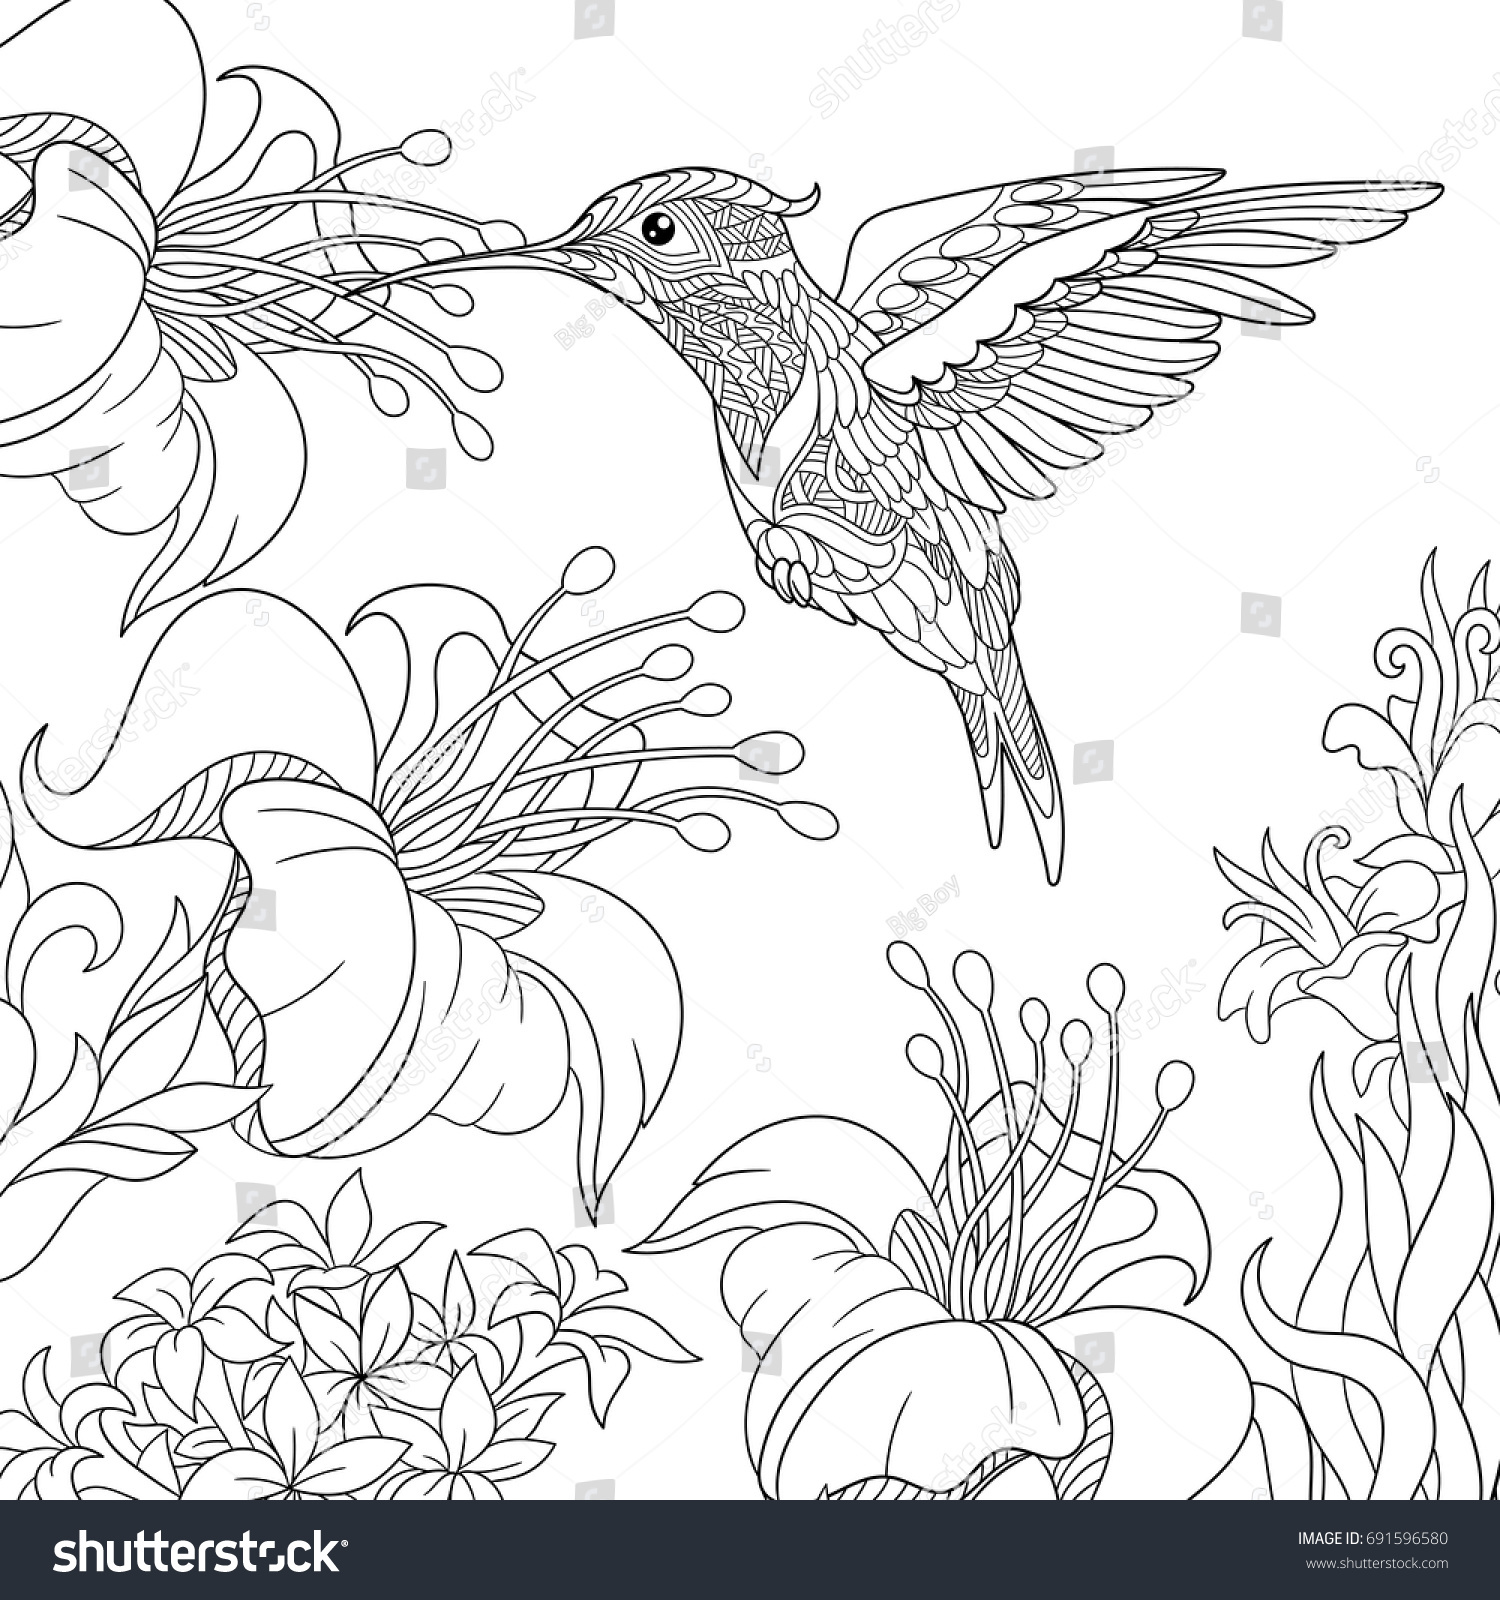 Download Coloring Page Hummingbird Hibiscus Flowers Freehand Stock ...